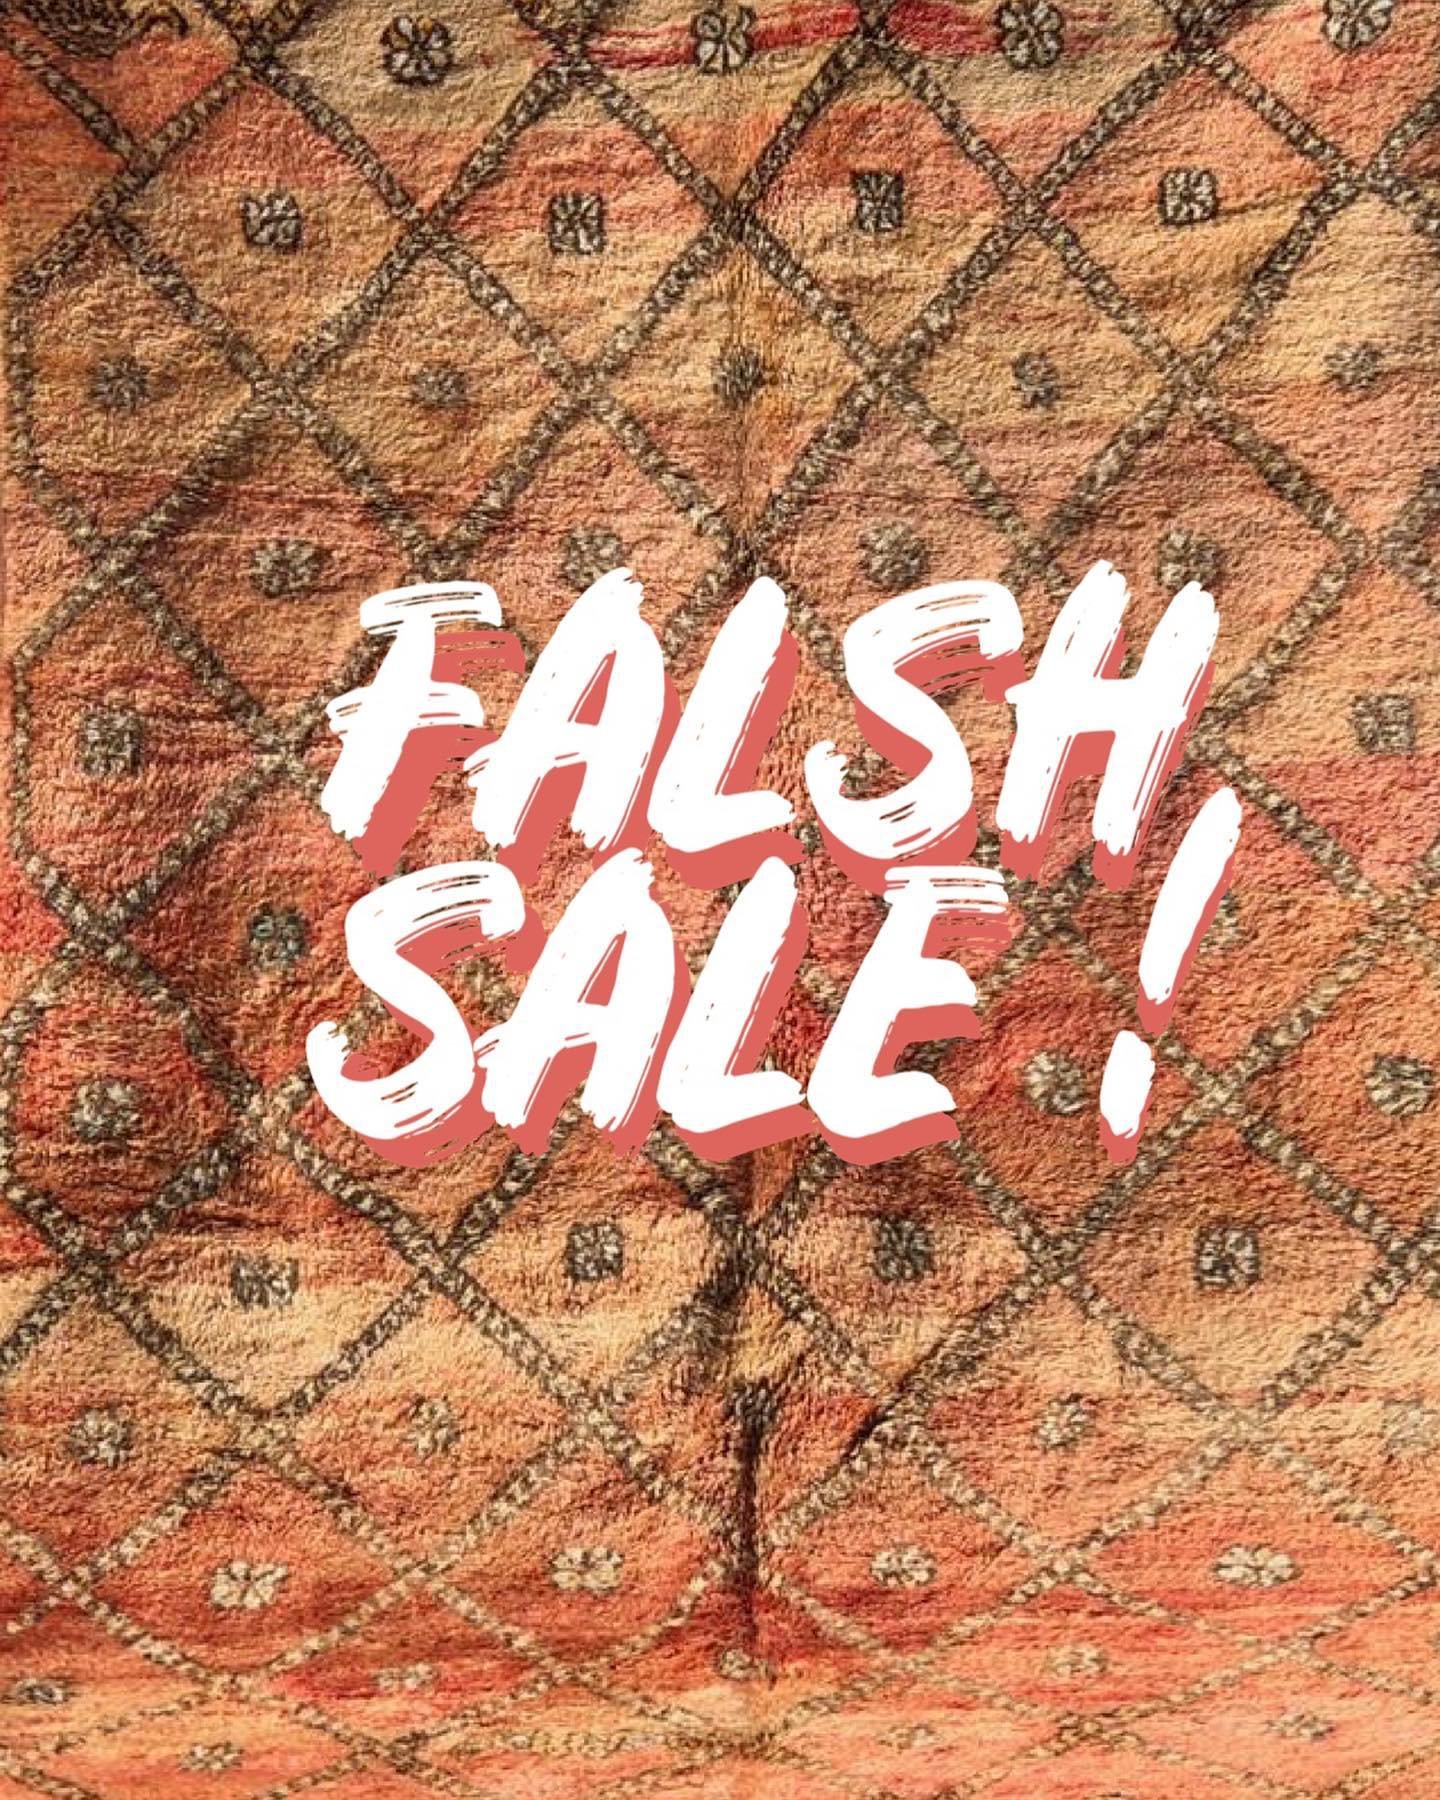 🔥 **Vintage Rug Flash Sale!** 🔥

Swipe through our story highlights to explore our exclusive collection of vintage Beni M&rsquo;guild rugs. 

❤️&zwj;🔥 Priced at just **788&euro; each** ❤️&zwj;🔥

These rugs are renowned for their deep, rich colors